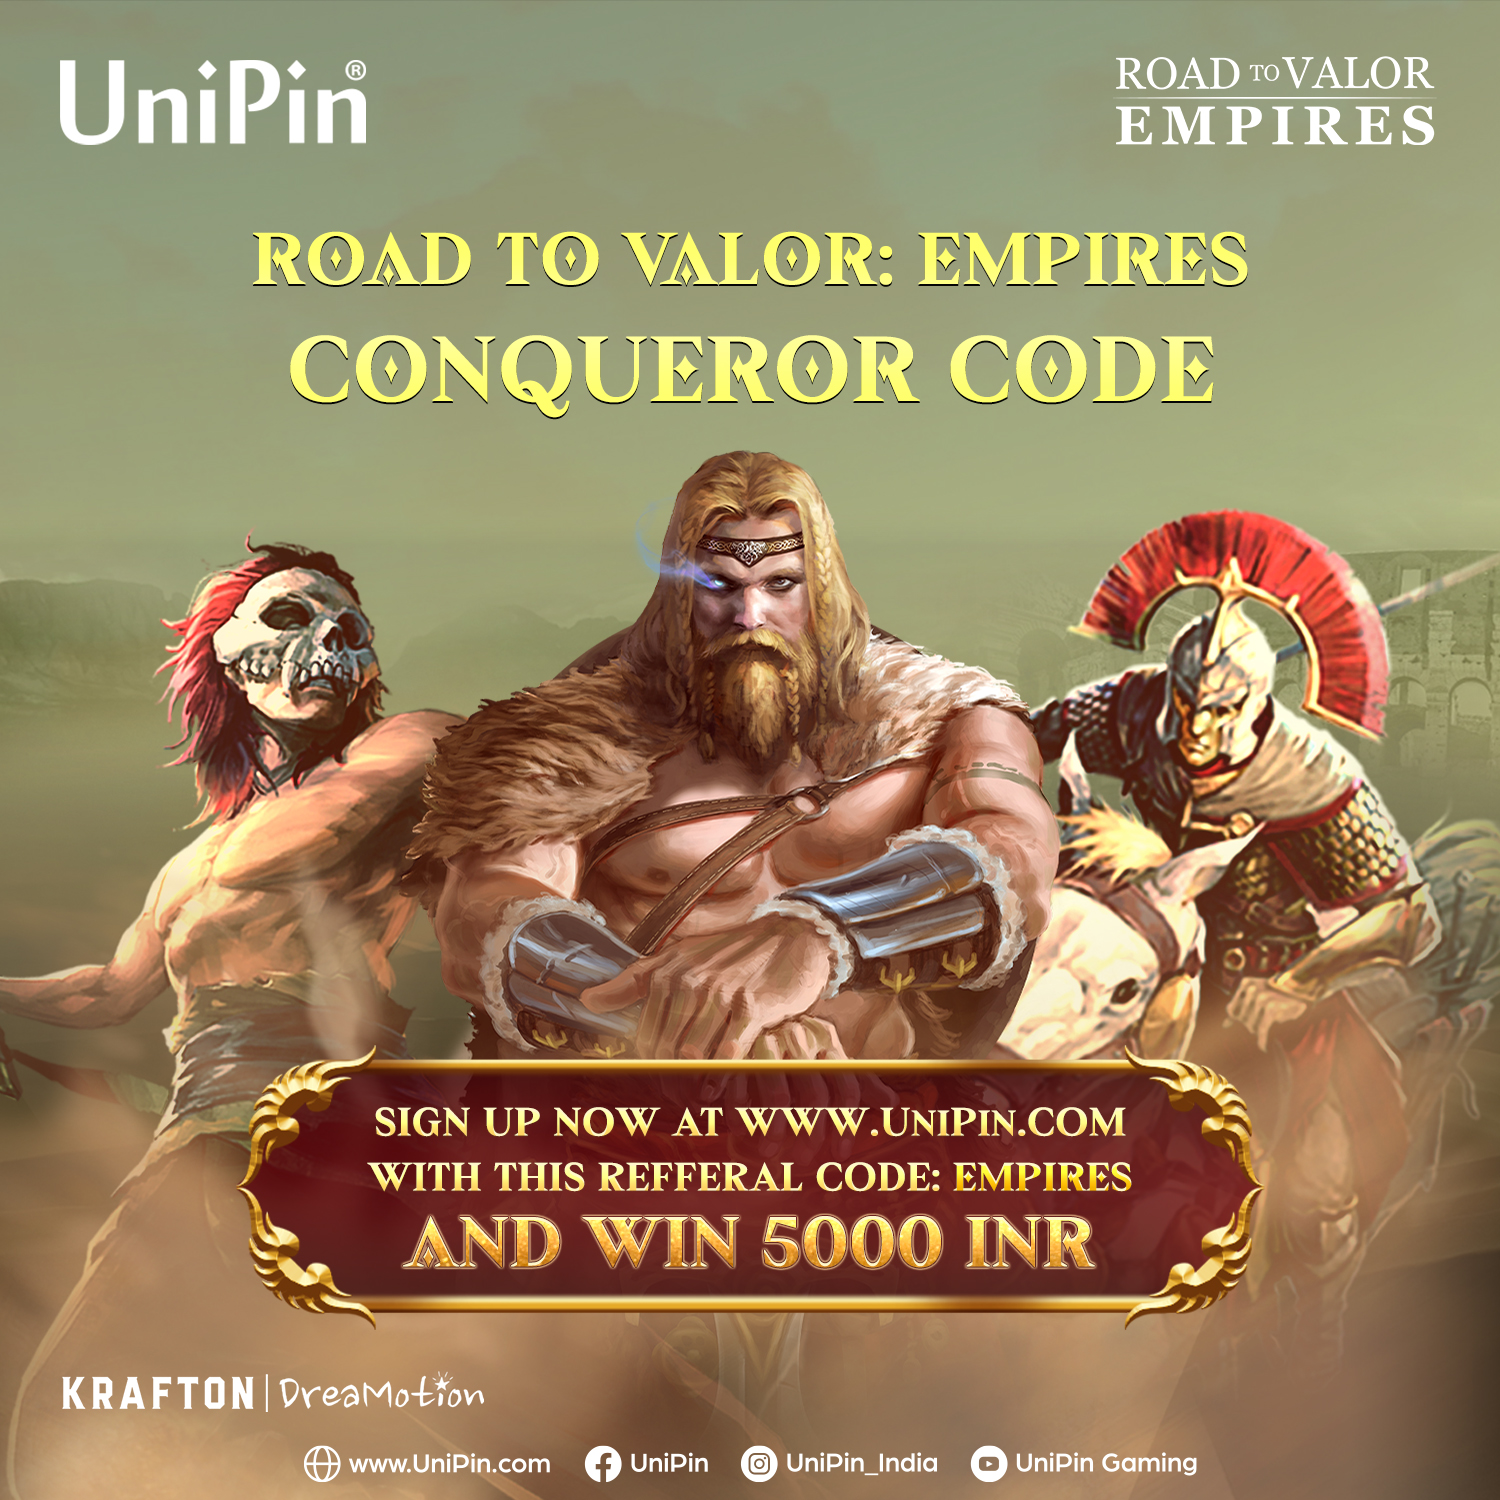 KRAFTON x UniPin: Krafton publisher of Road to Valor Empires announces UniPin as the official distribution partner for the game, CHECK DETAILS